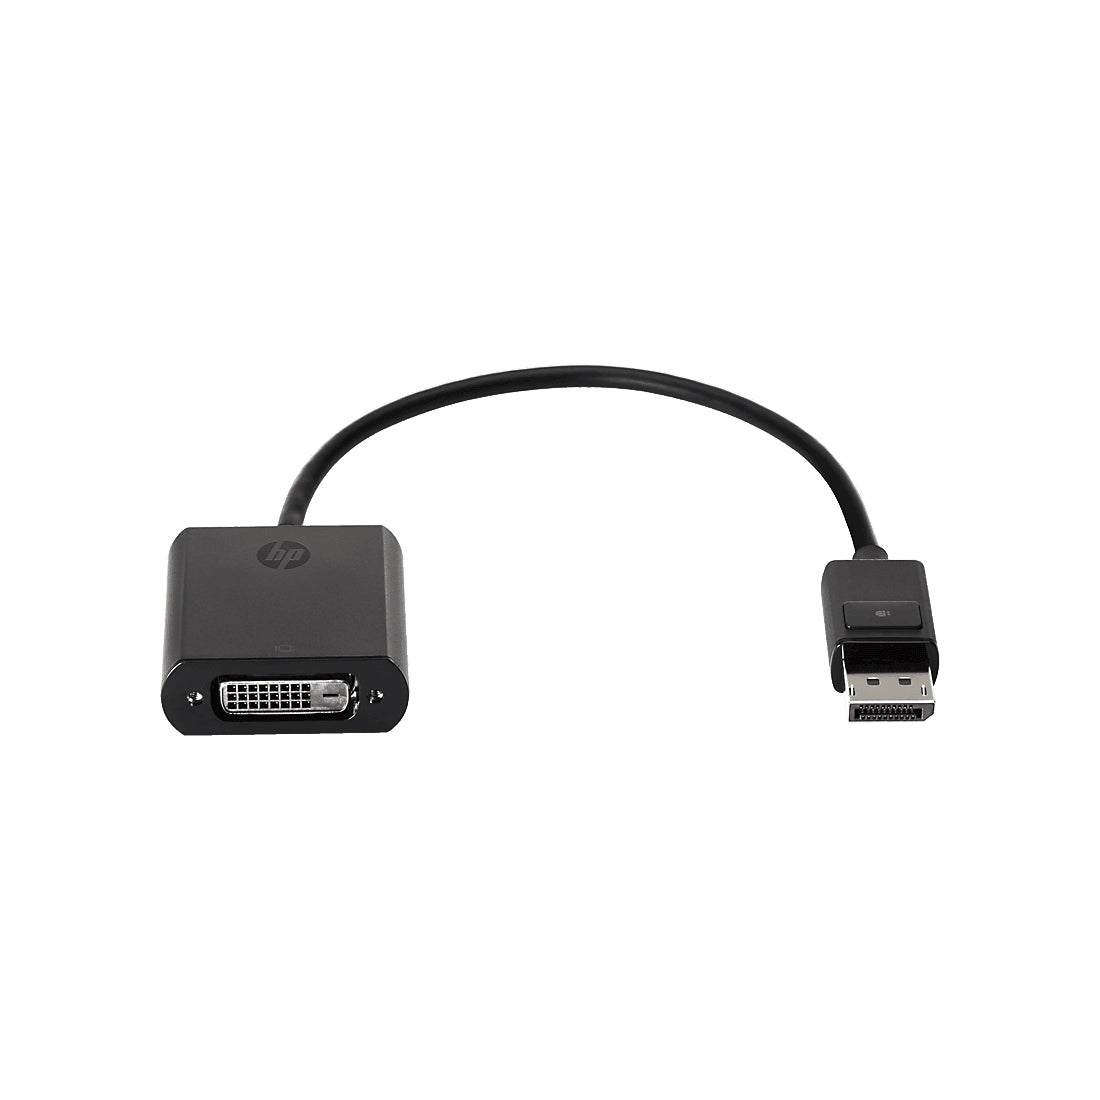 HP DisplayPort to DVI-D Adapter with Latching DisplayPort Connector